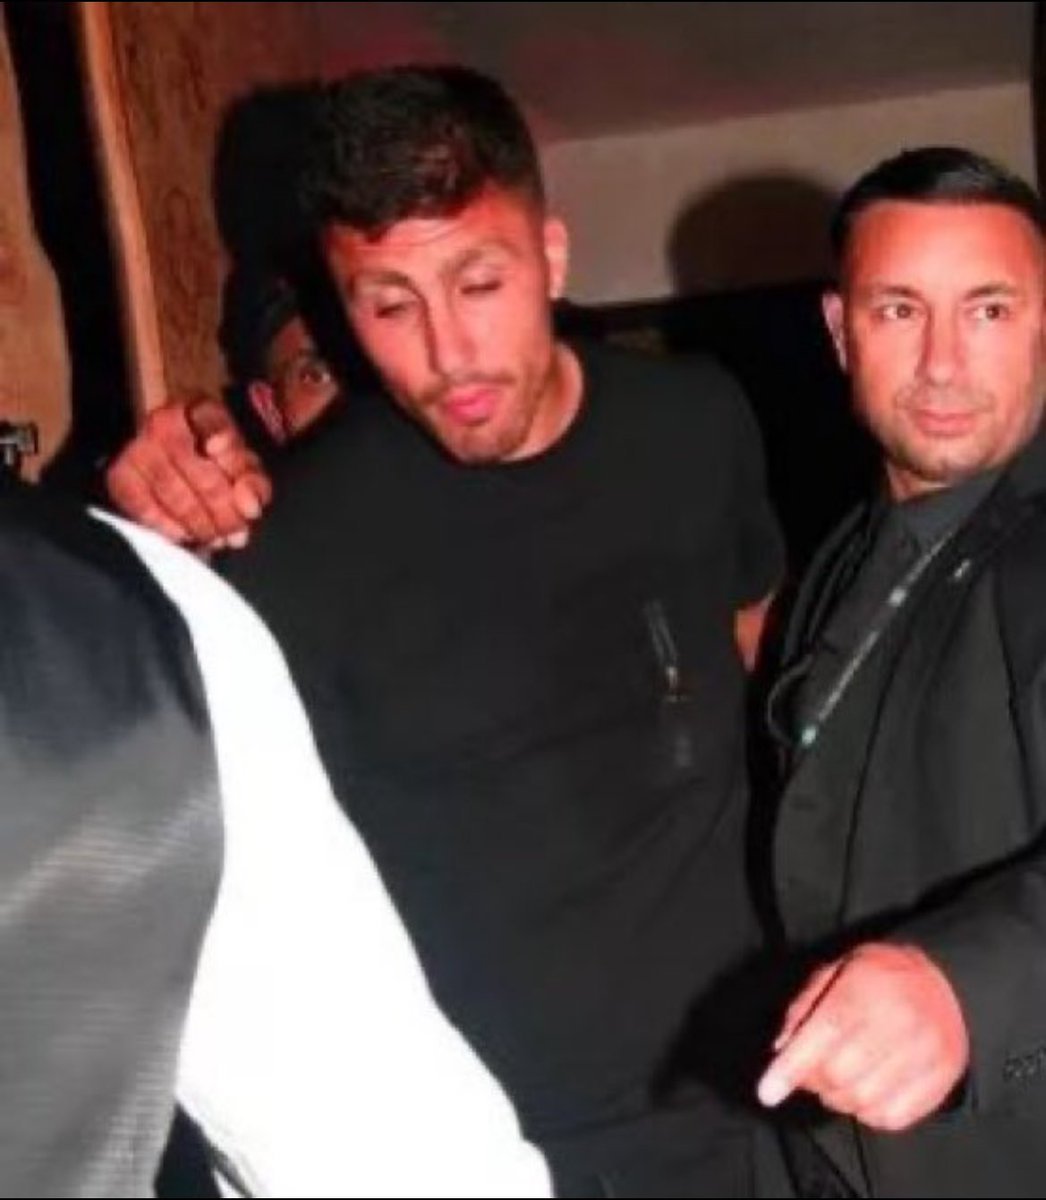 Jack Grealish & Rodri leaving their title winning party last night at 5am…

They are absolutely steaming 🤣🤣🤣